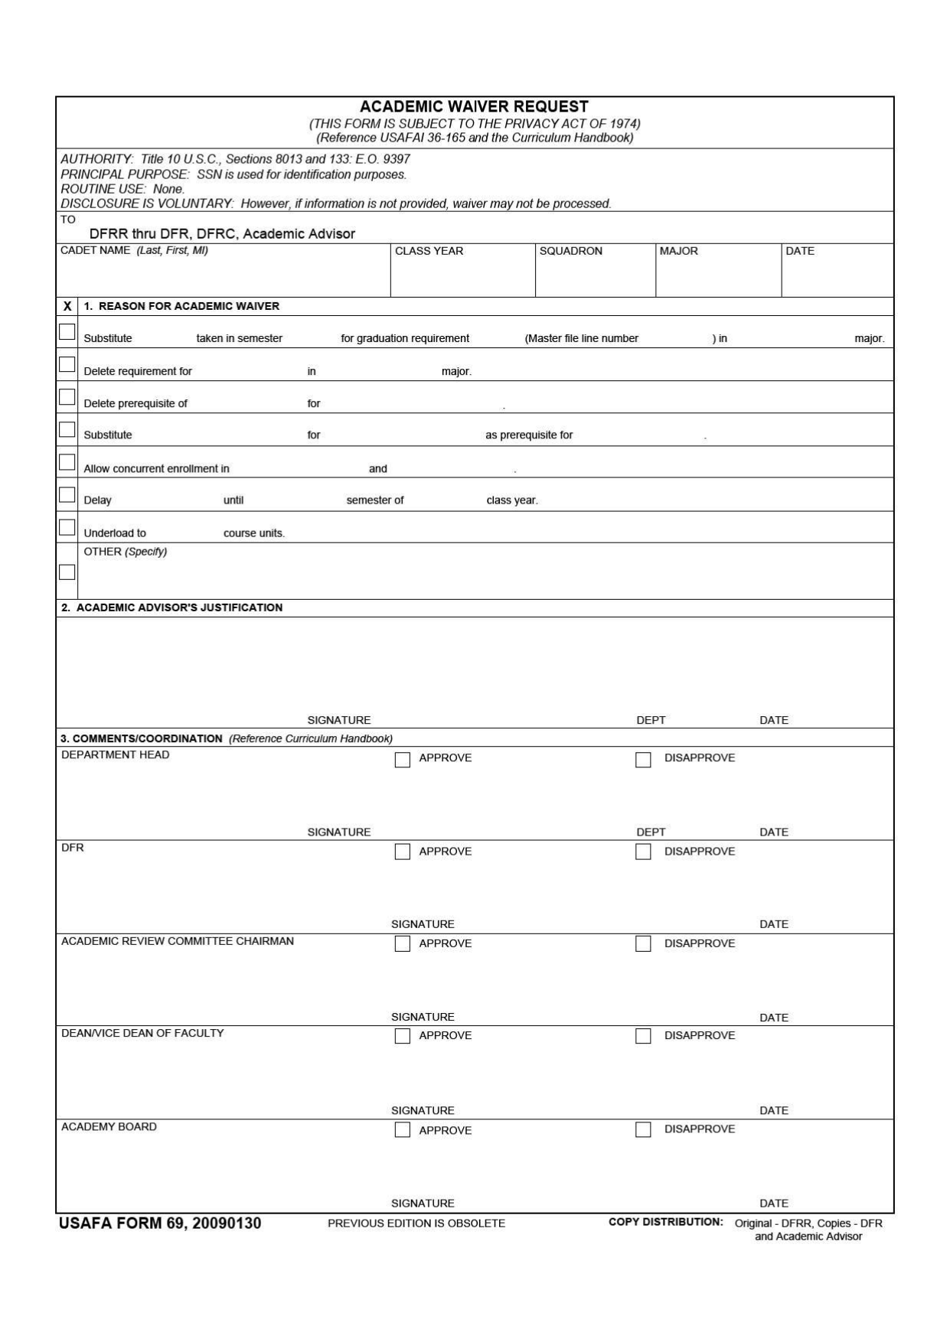 USAFA Form 69 Download Fillable PDF Or Fill Online Academic Waiver 